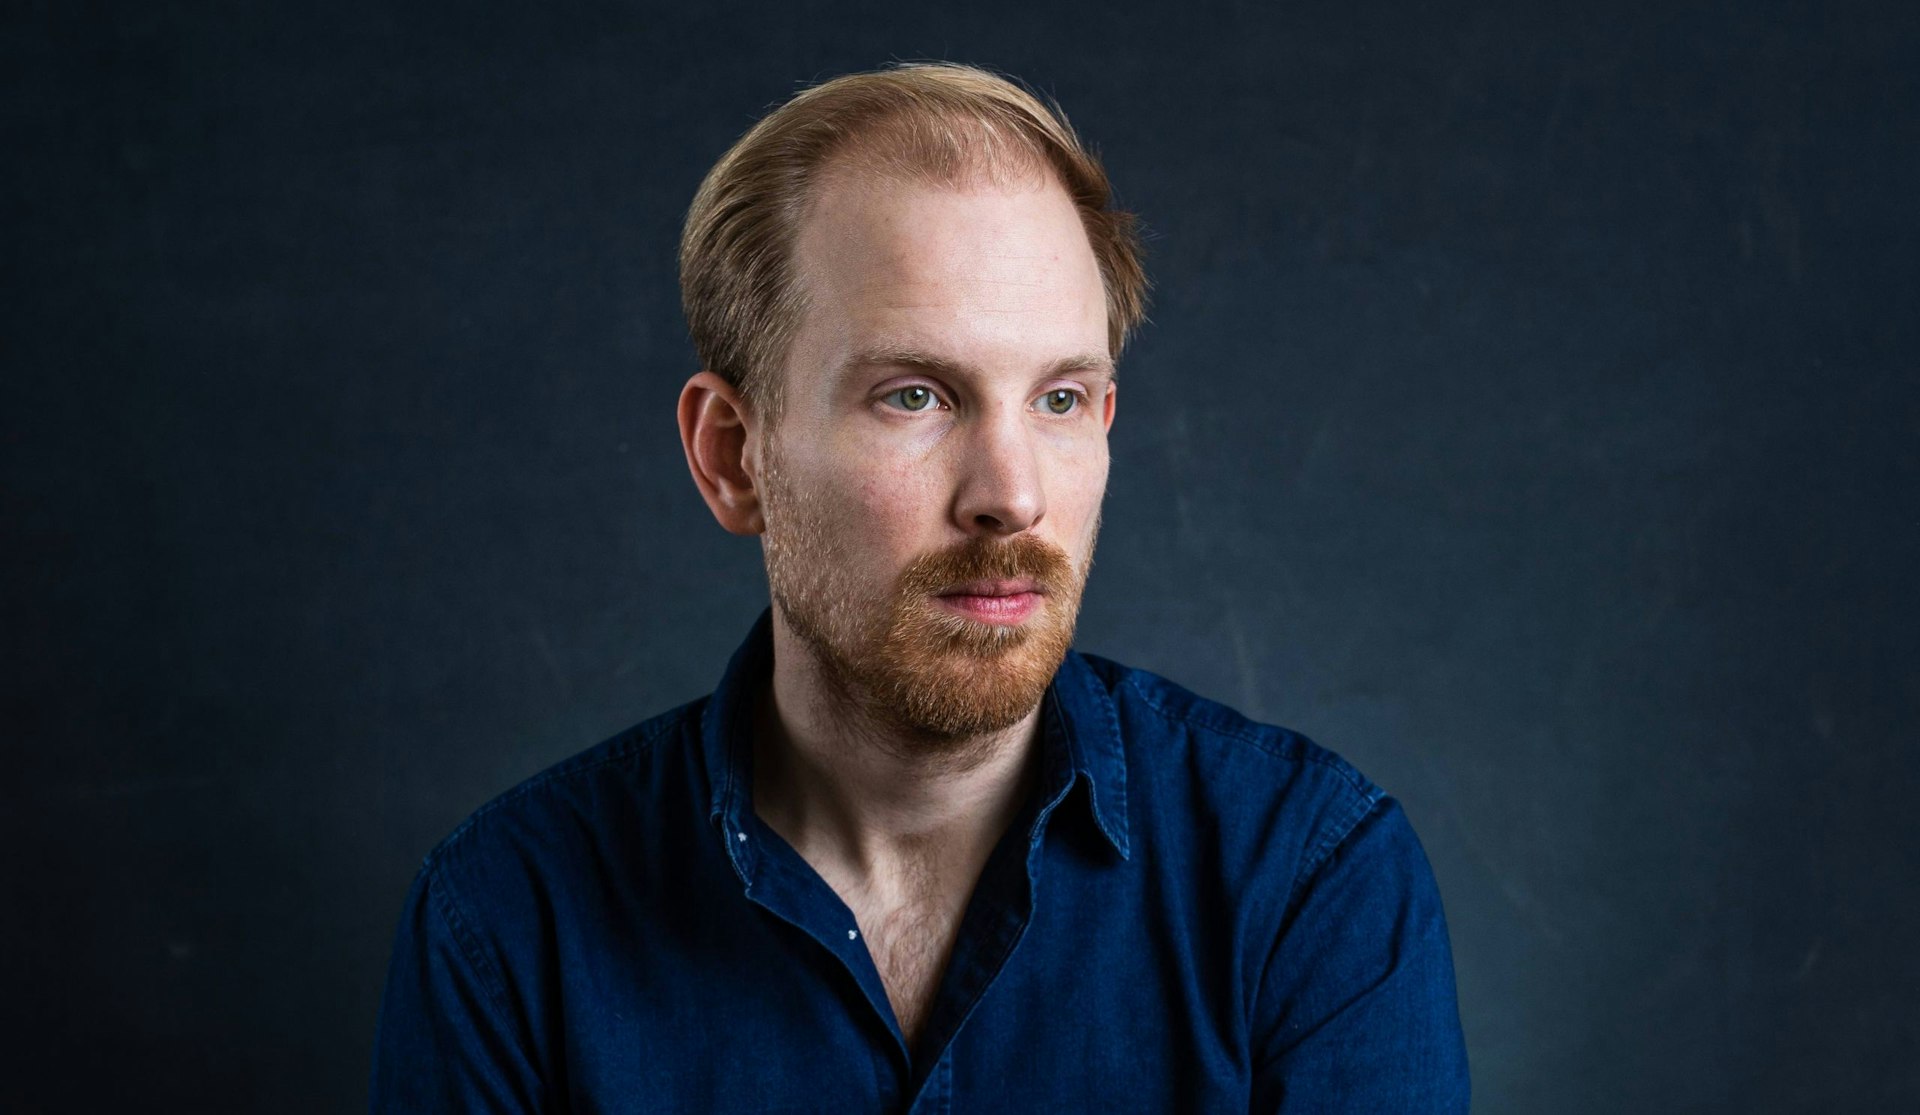 Rutger Bregman on protest, privilege + defunding the police